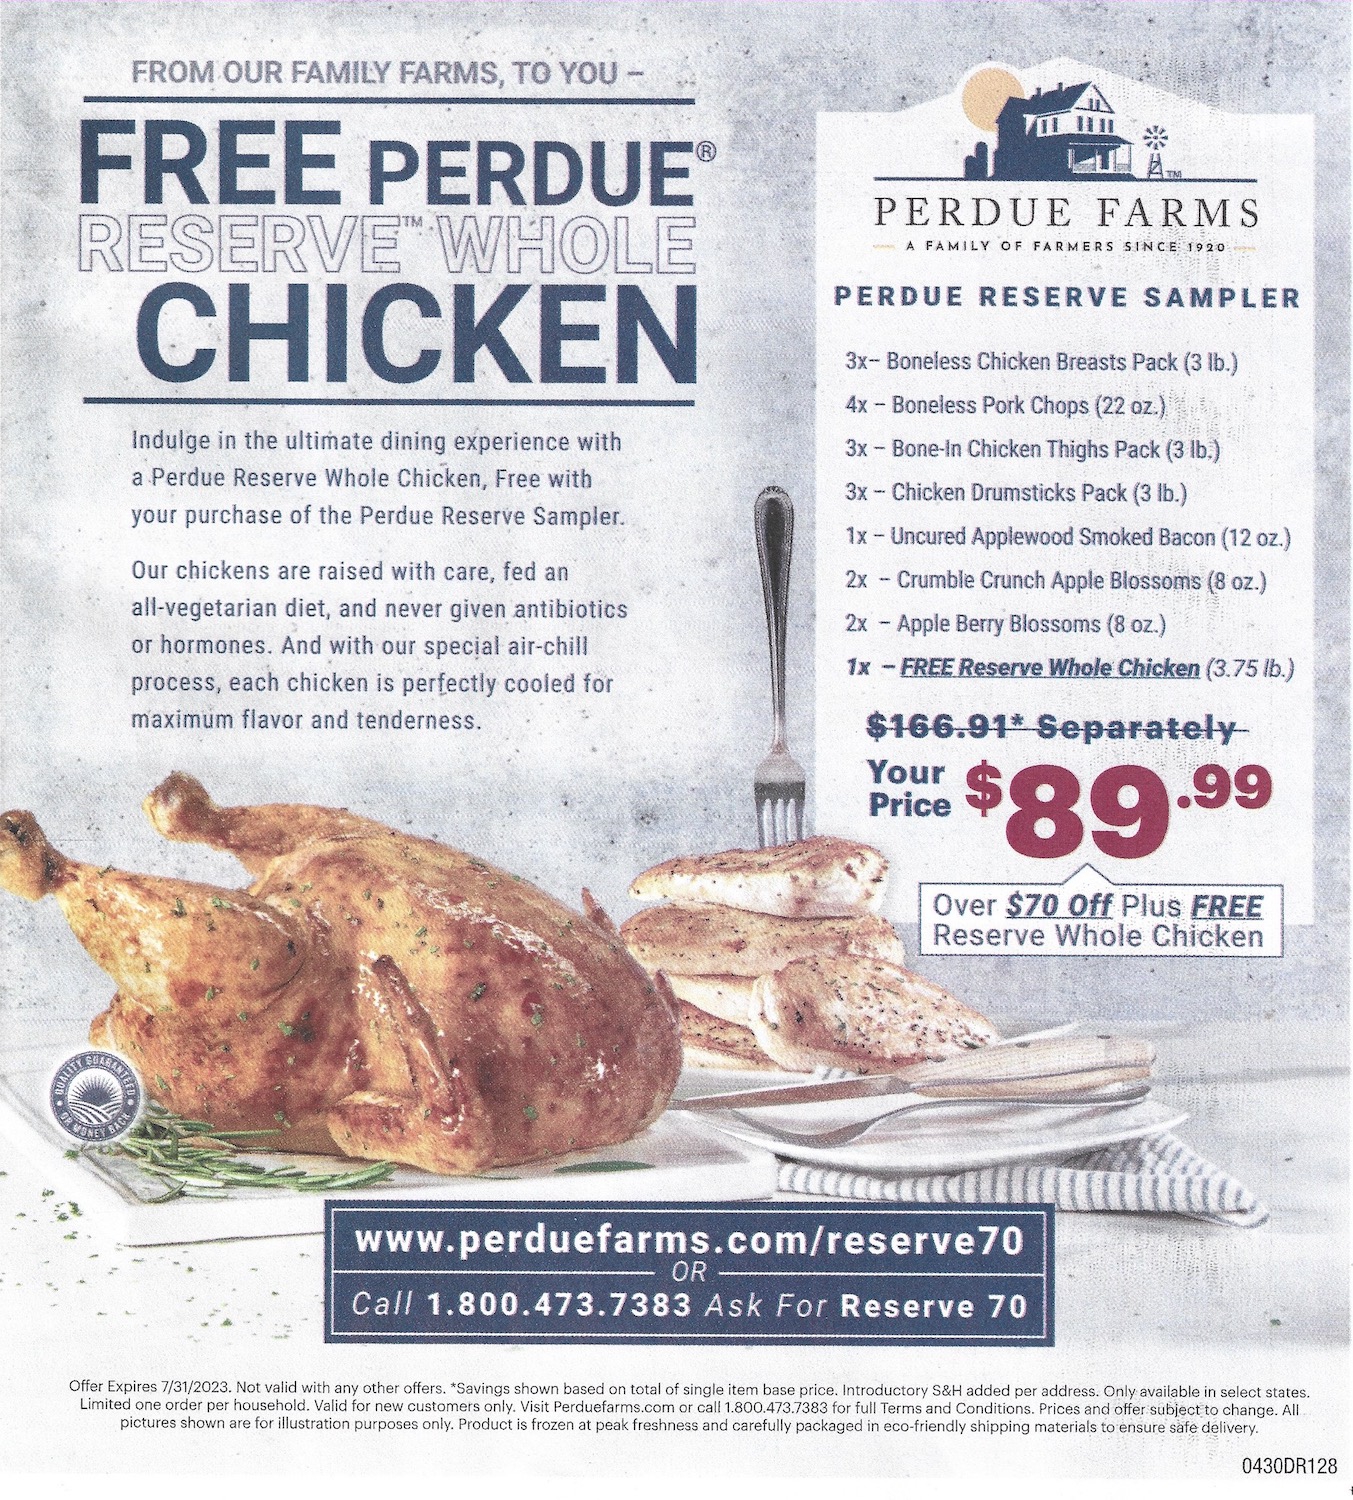 Free Perdue Farms Reserve Whole Chicken Promotion